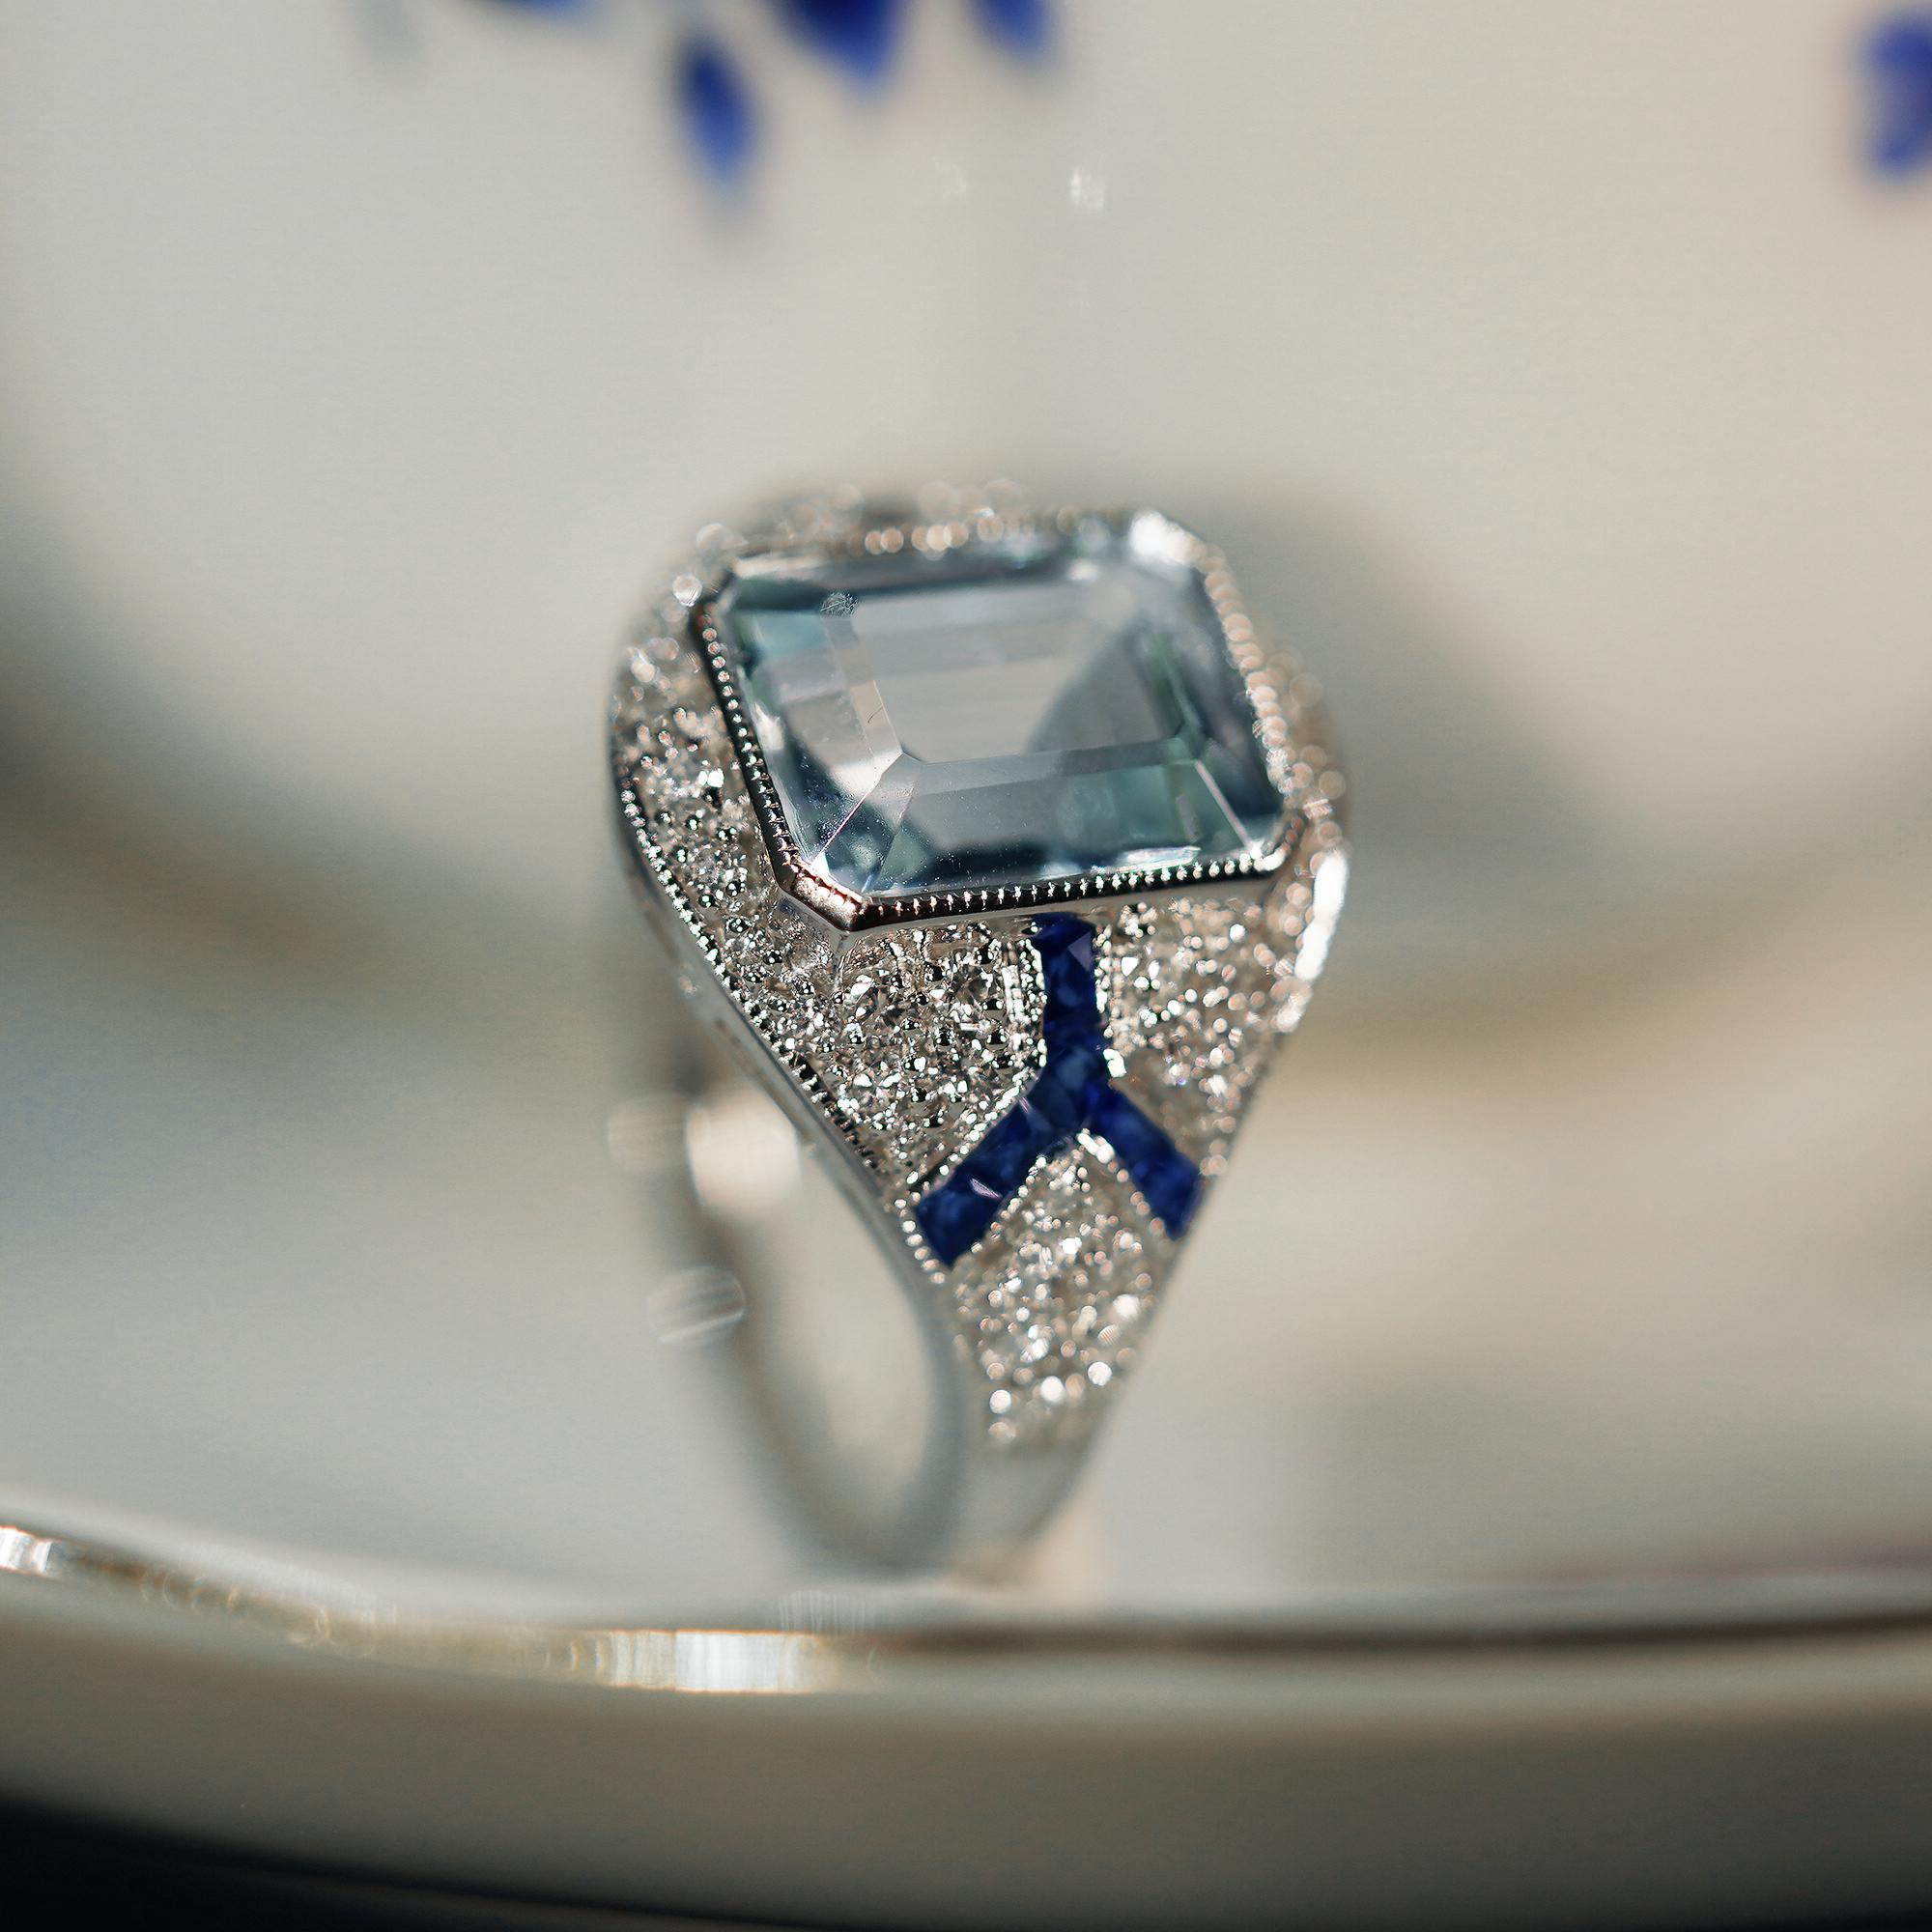 A gorgeous emerald cut aquamarine is presented in classic Art Deco style. The glorious light blue  gemstone radiates from within a sparkling halo of bright round brilliant cut diamonds punctuated east and west with two lines of French cut blue